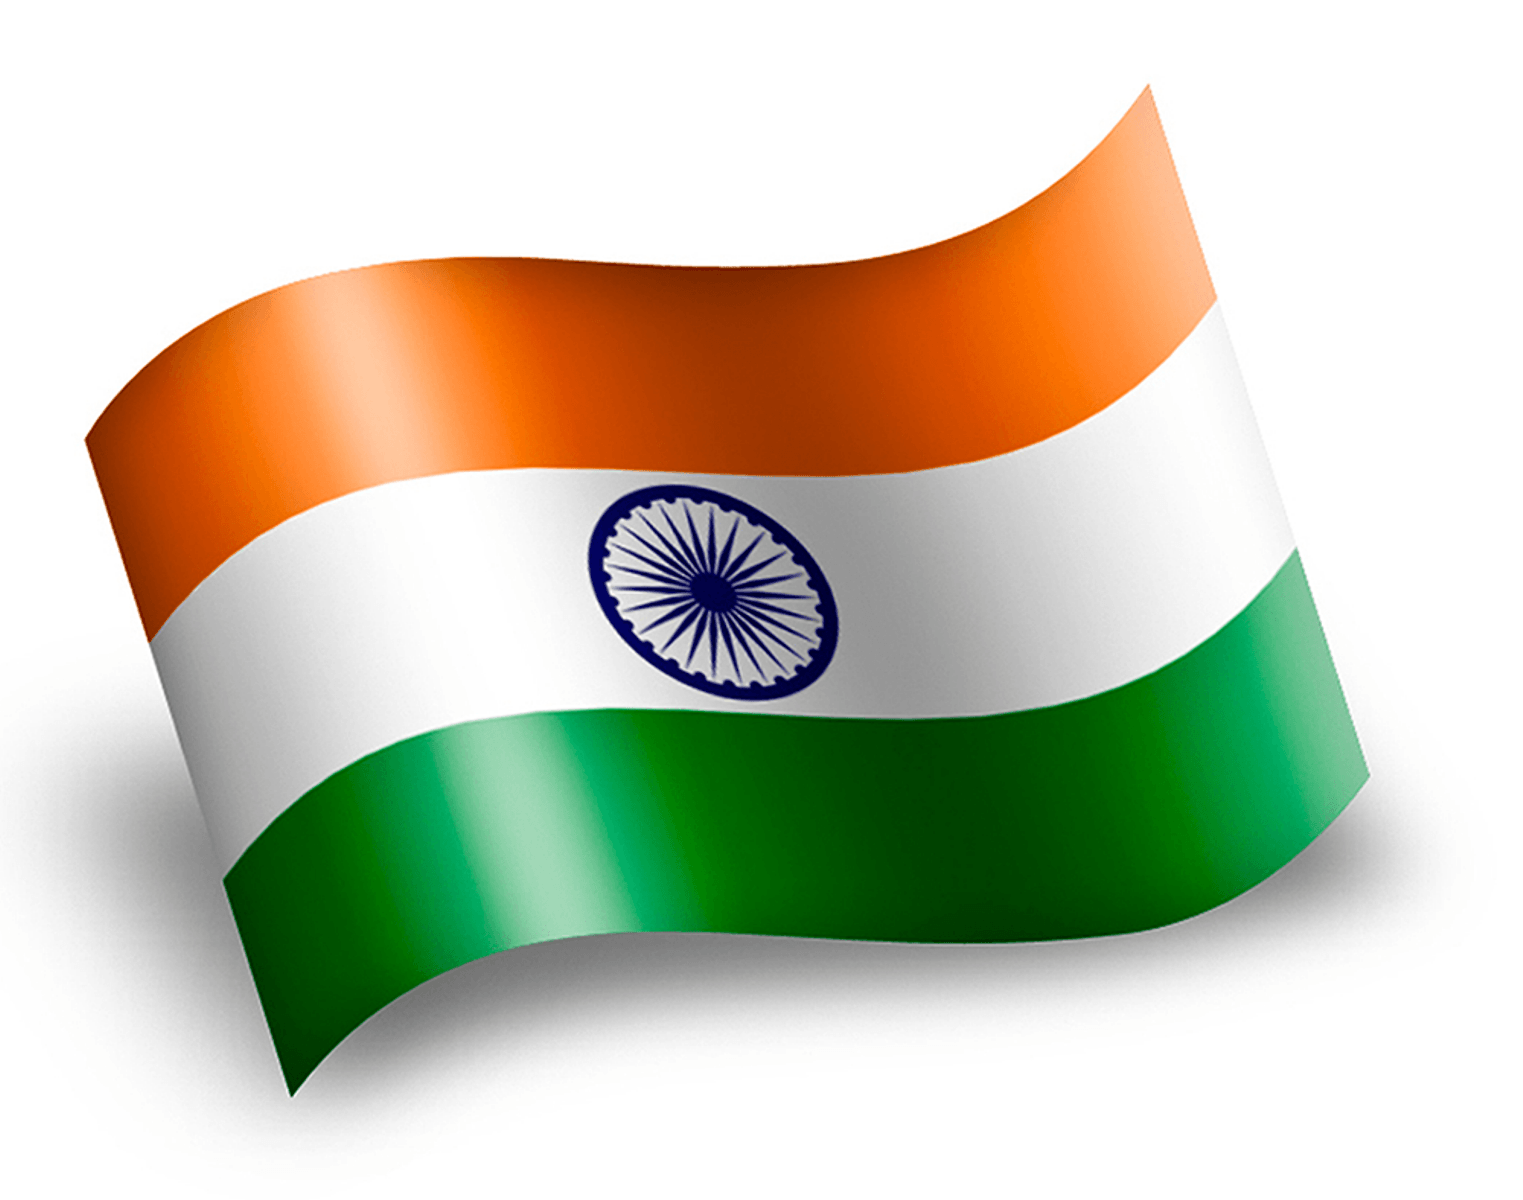 India Flag Wallpapers 2017 - Wallpaper Cave